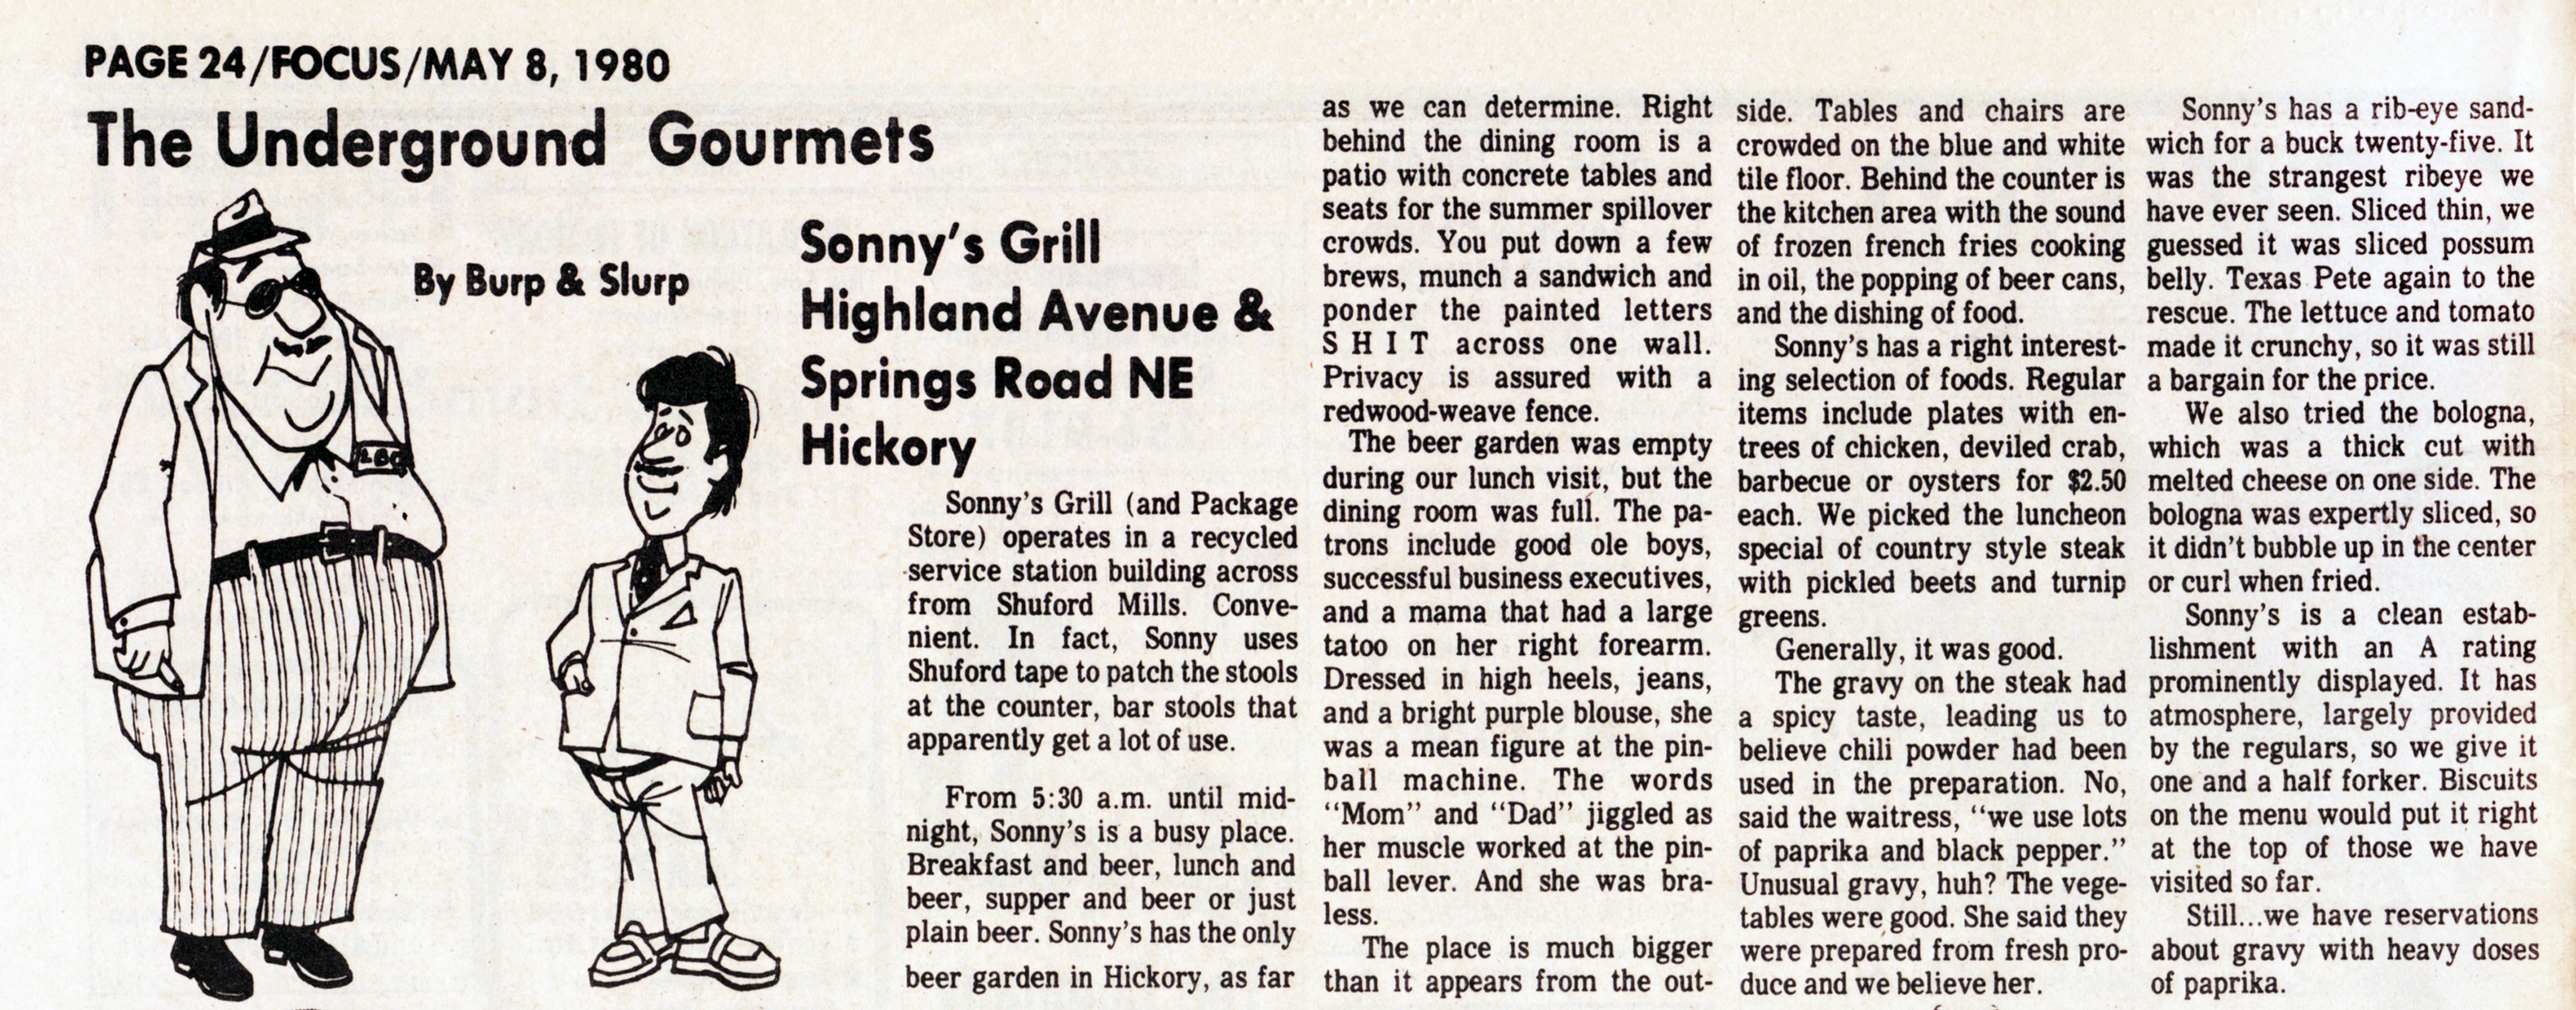 "The Underground Gourmets" Column by Burp & Slurp published May 8, 1980.